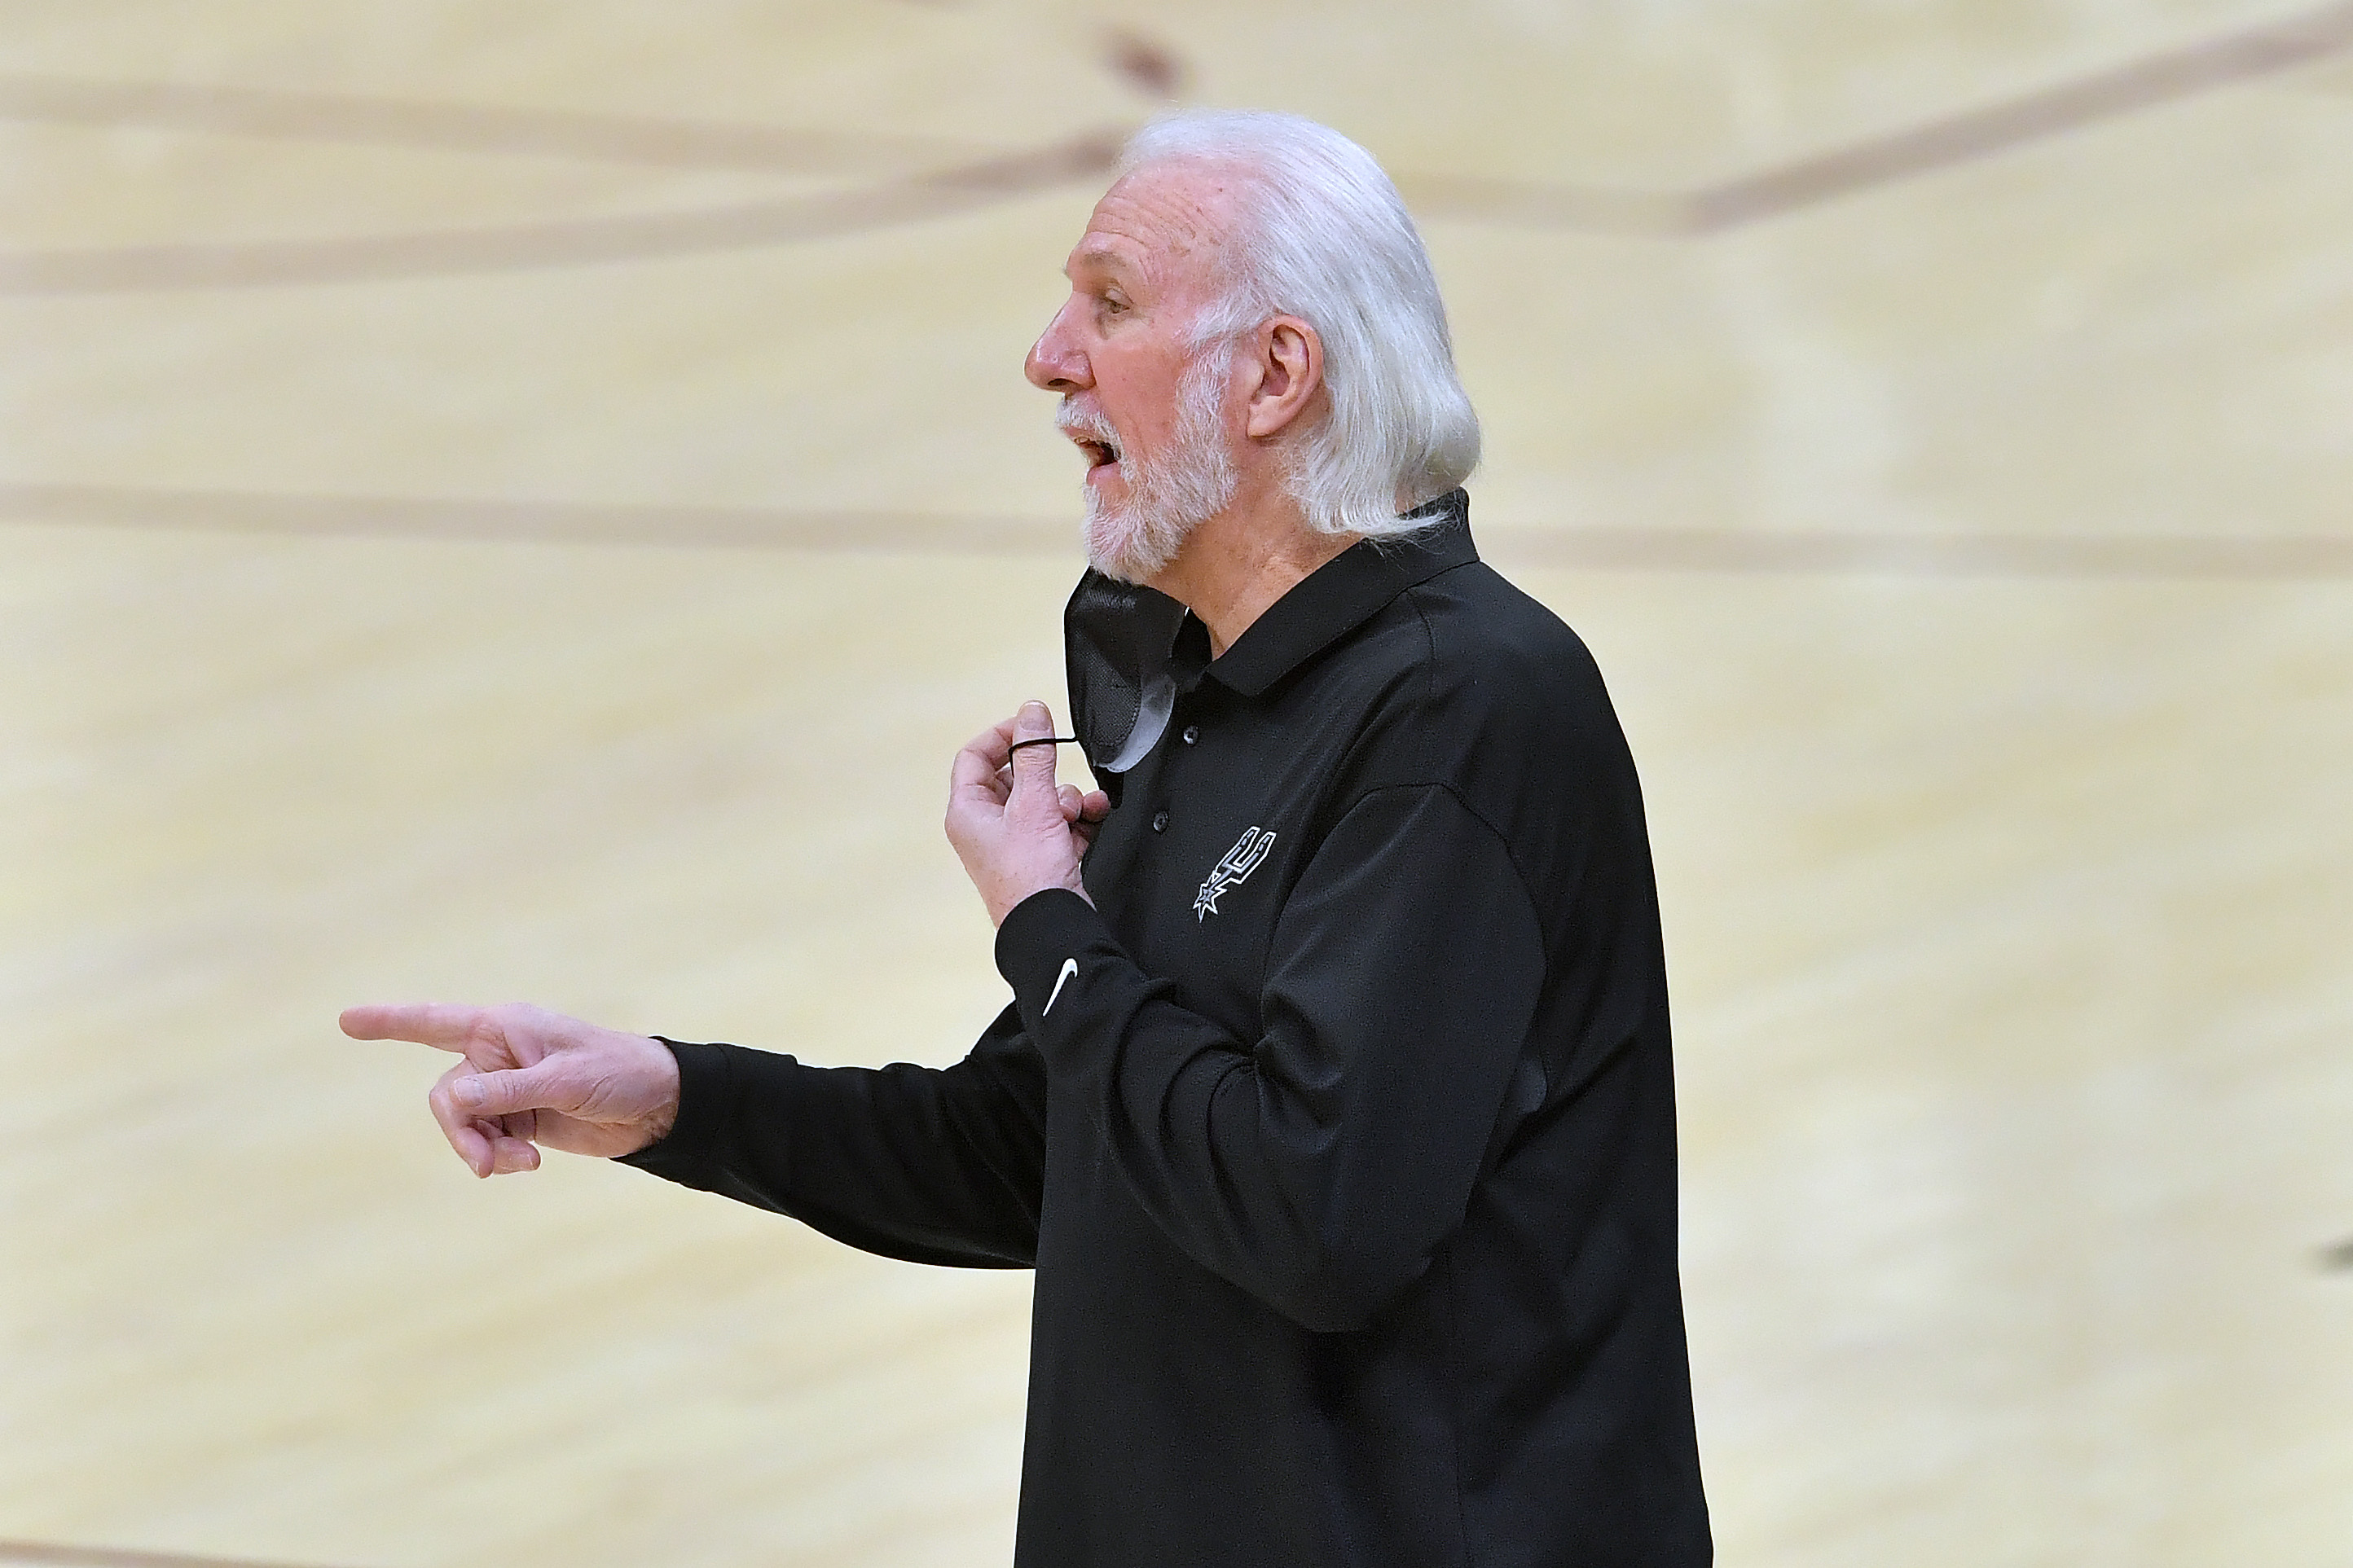 CLEVELAND, OHIO - MARCH 19: Head coach Gregg Popovich of the San Antonio Spurs talks to his players during the second quarter against the Cleveland Cavaliers at Rocket Mortgage Fieldhouse on March 19, 2021 in Cleveland, Ohio. NOTE TO USER: User expressly acknowledges and agrees that, by downloading and/or using this photograph, user is consenting to the terms and conditions of the Getty Images License Agreement. (Photo by Jason Miller/Getty Images)